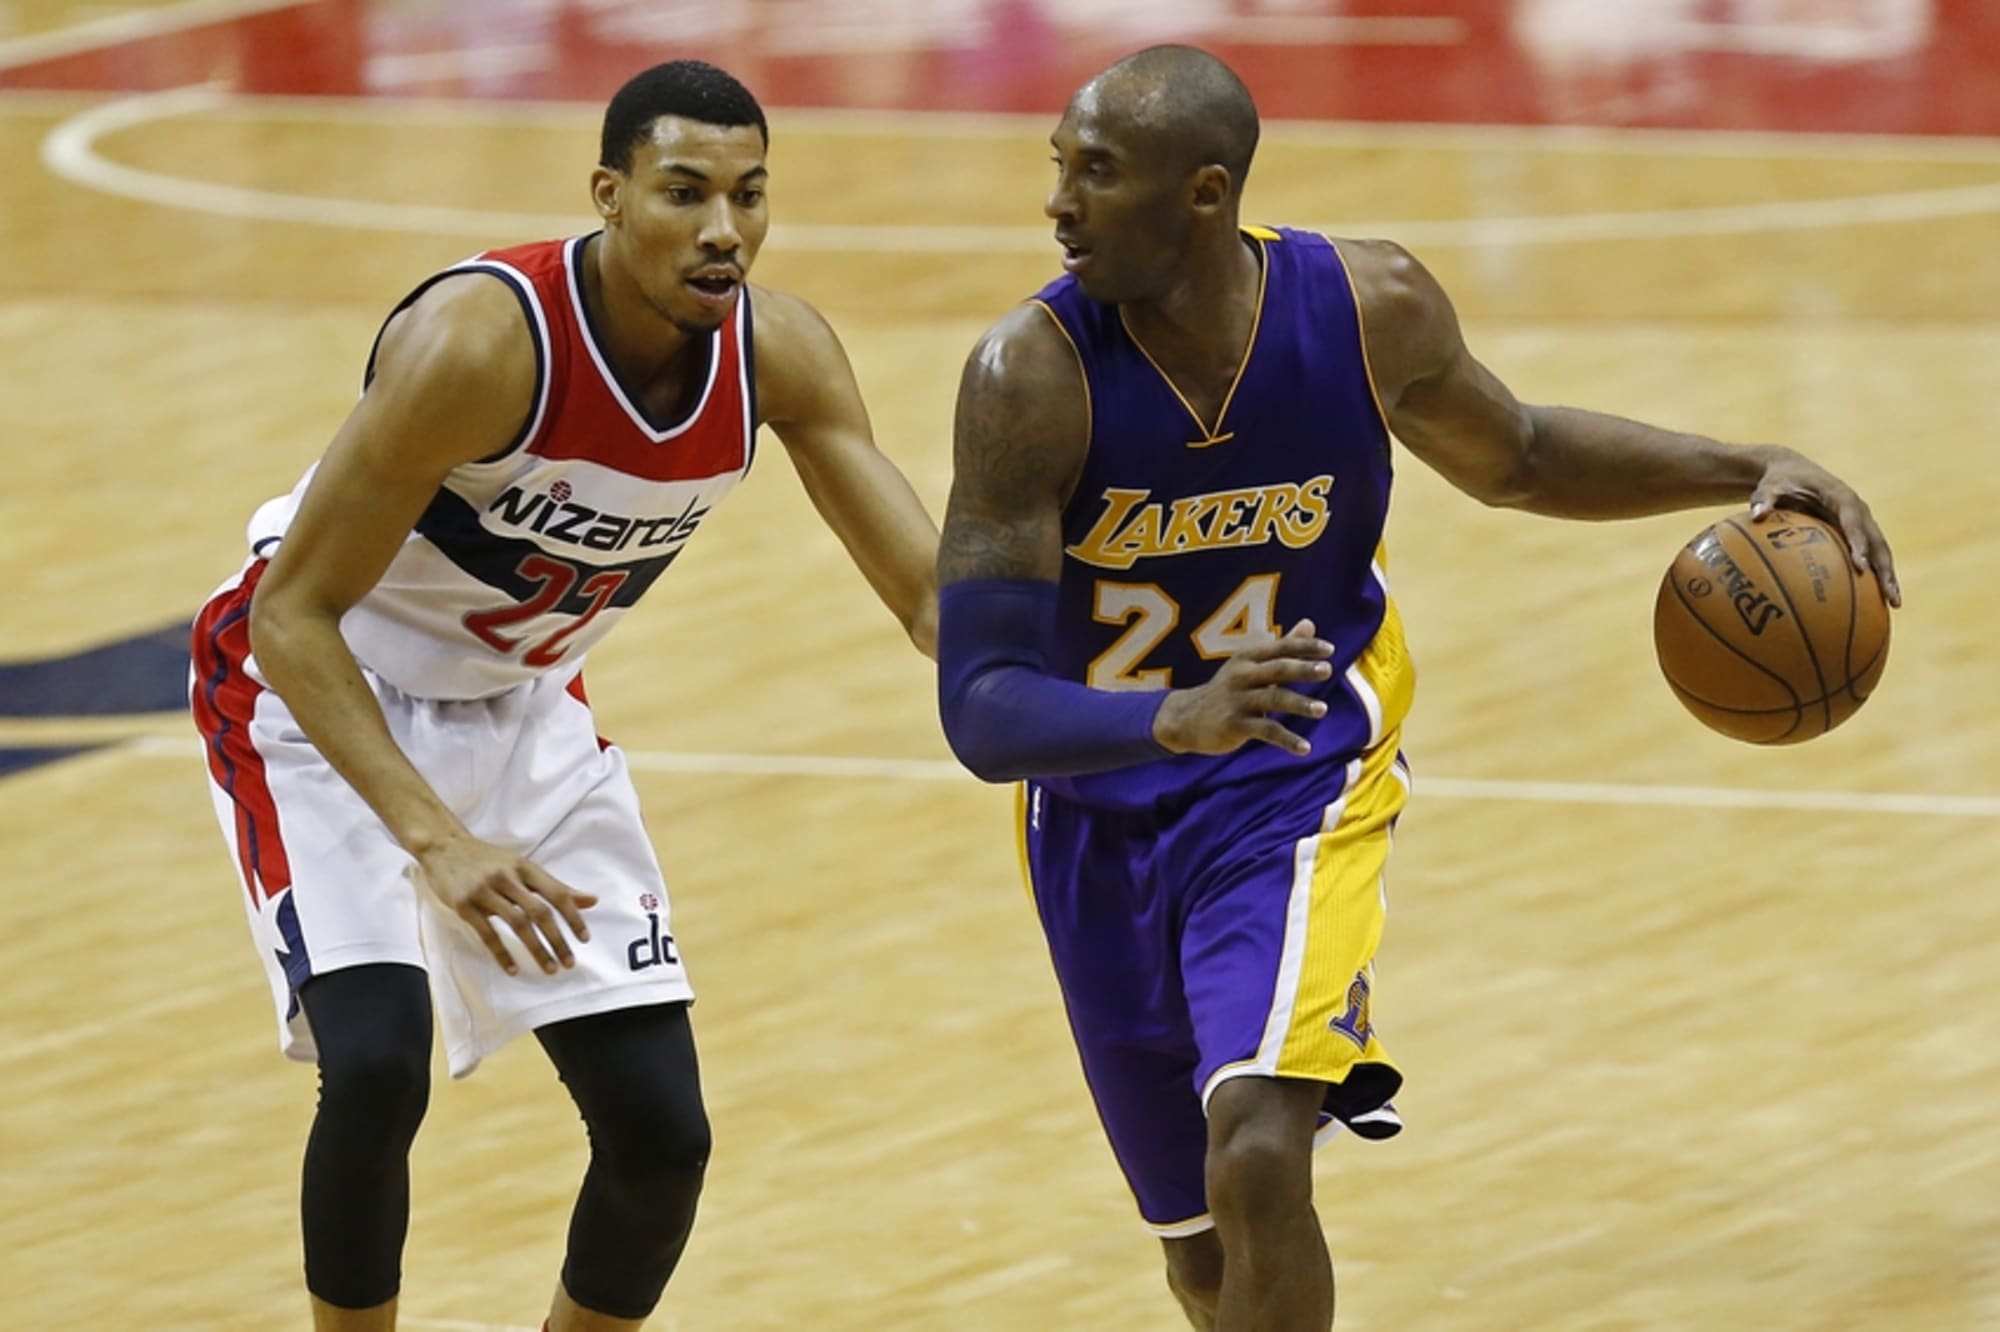 Lakers vs Wizards Preview and Predictions